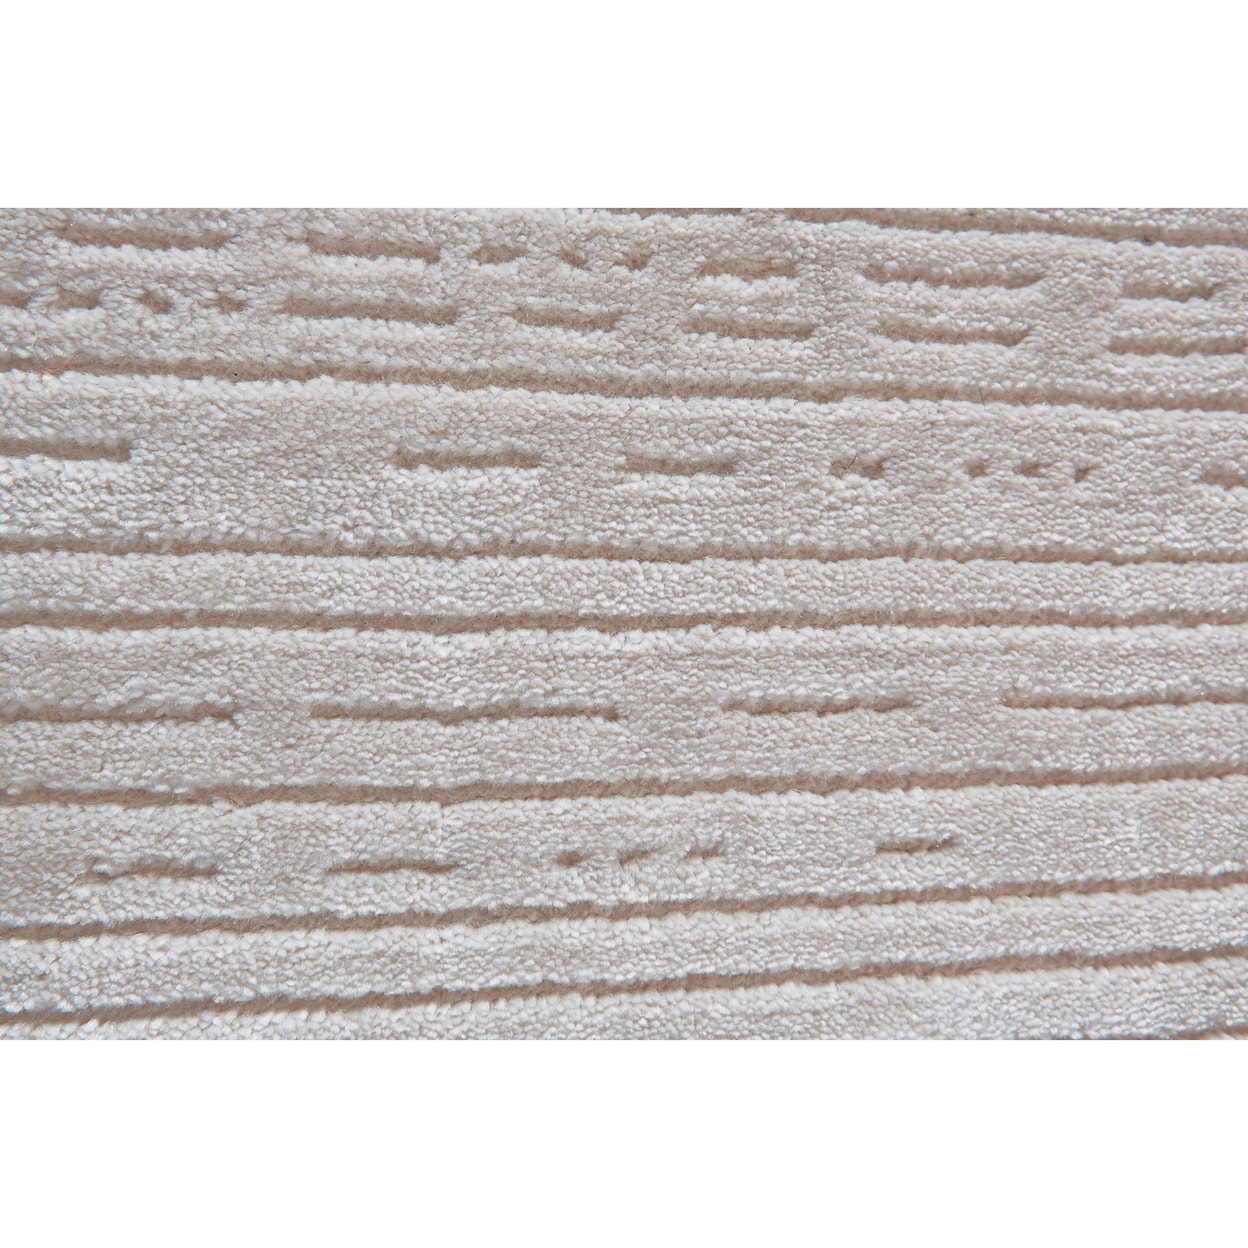 Feizy Rugs Melina Birch/White 8' X 11' Area Rug